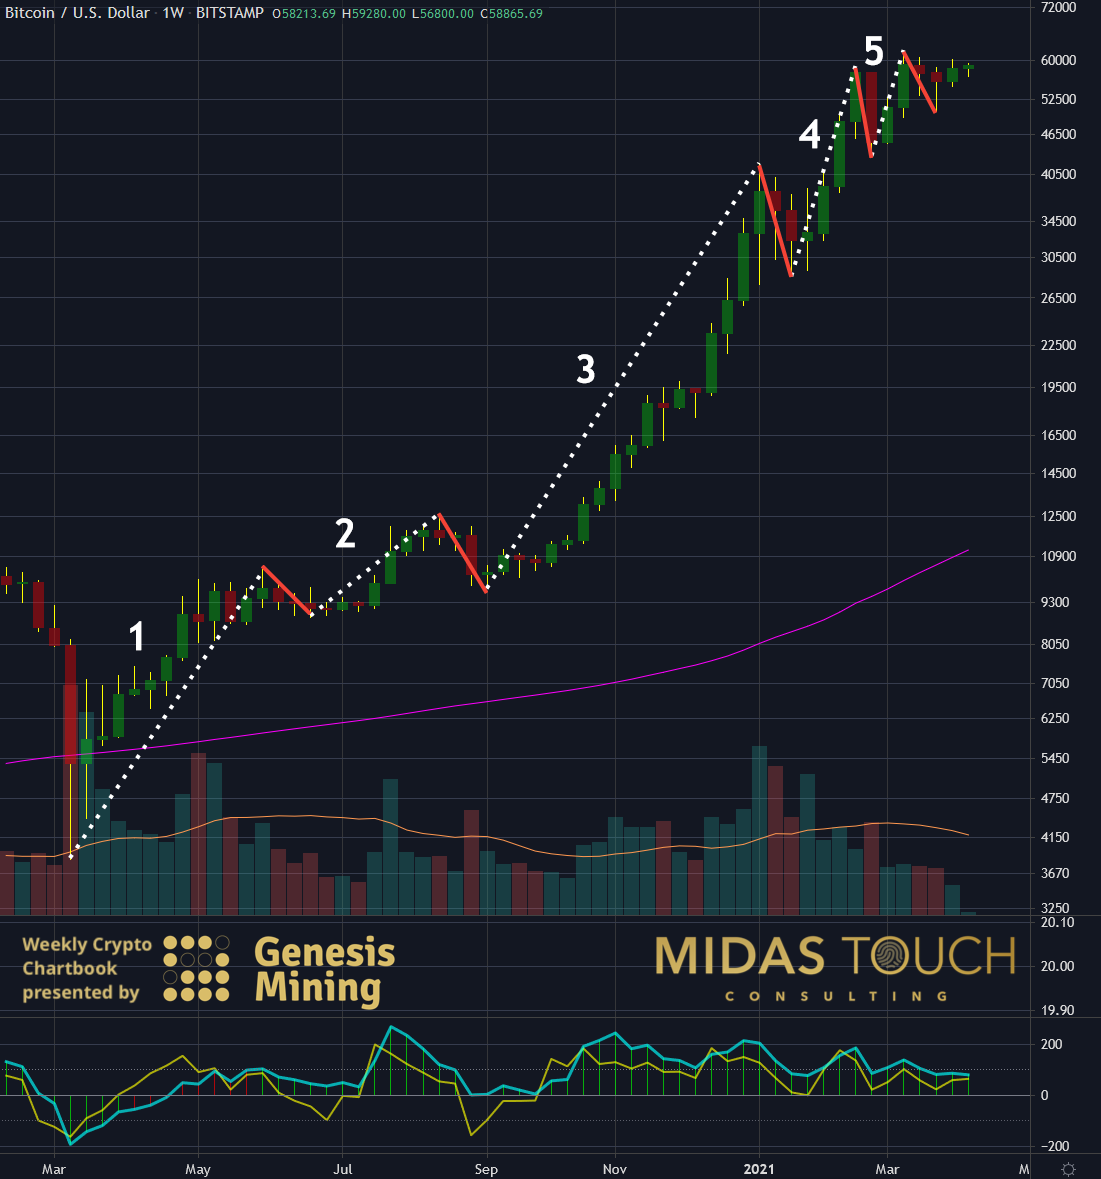 Bitcoin in US Dollar, weekly chart as of April 5th, 2021.